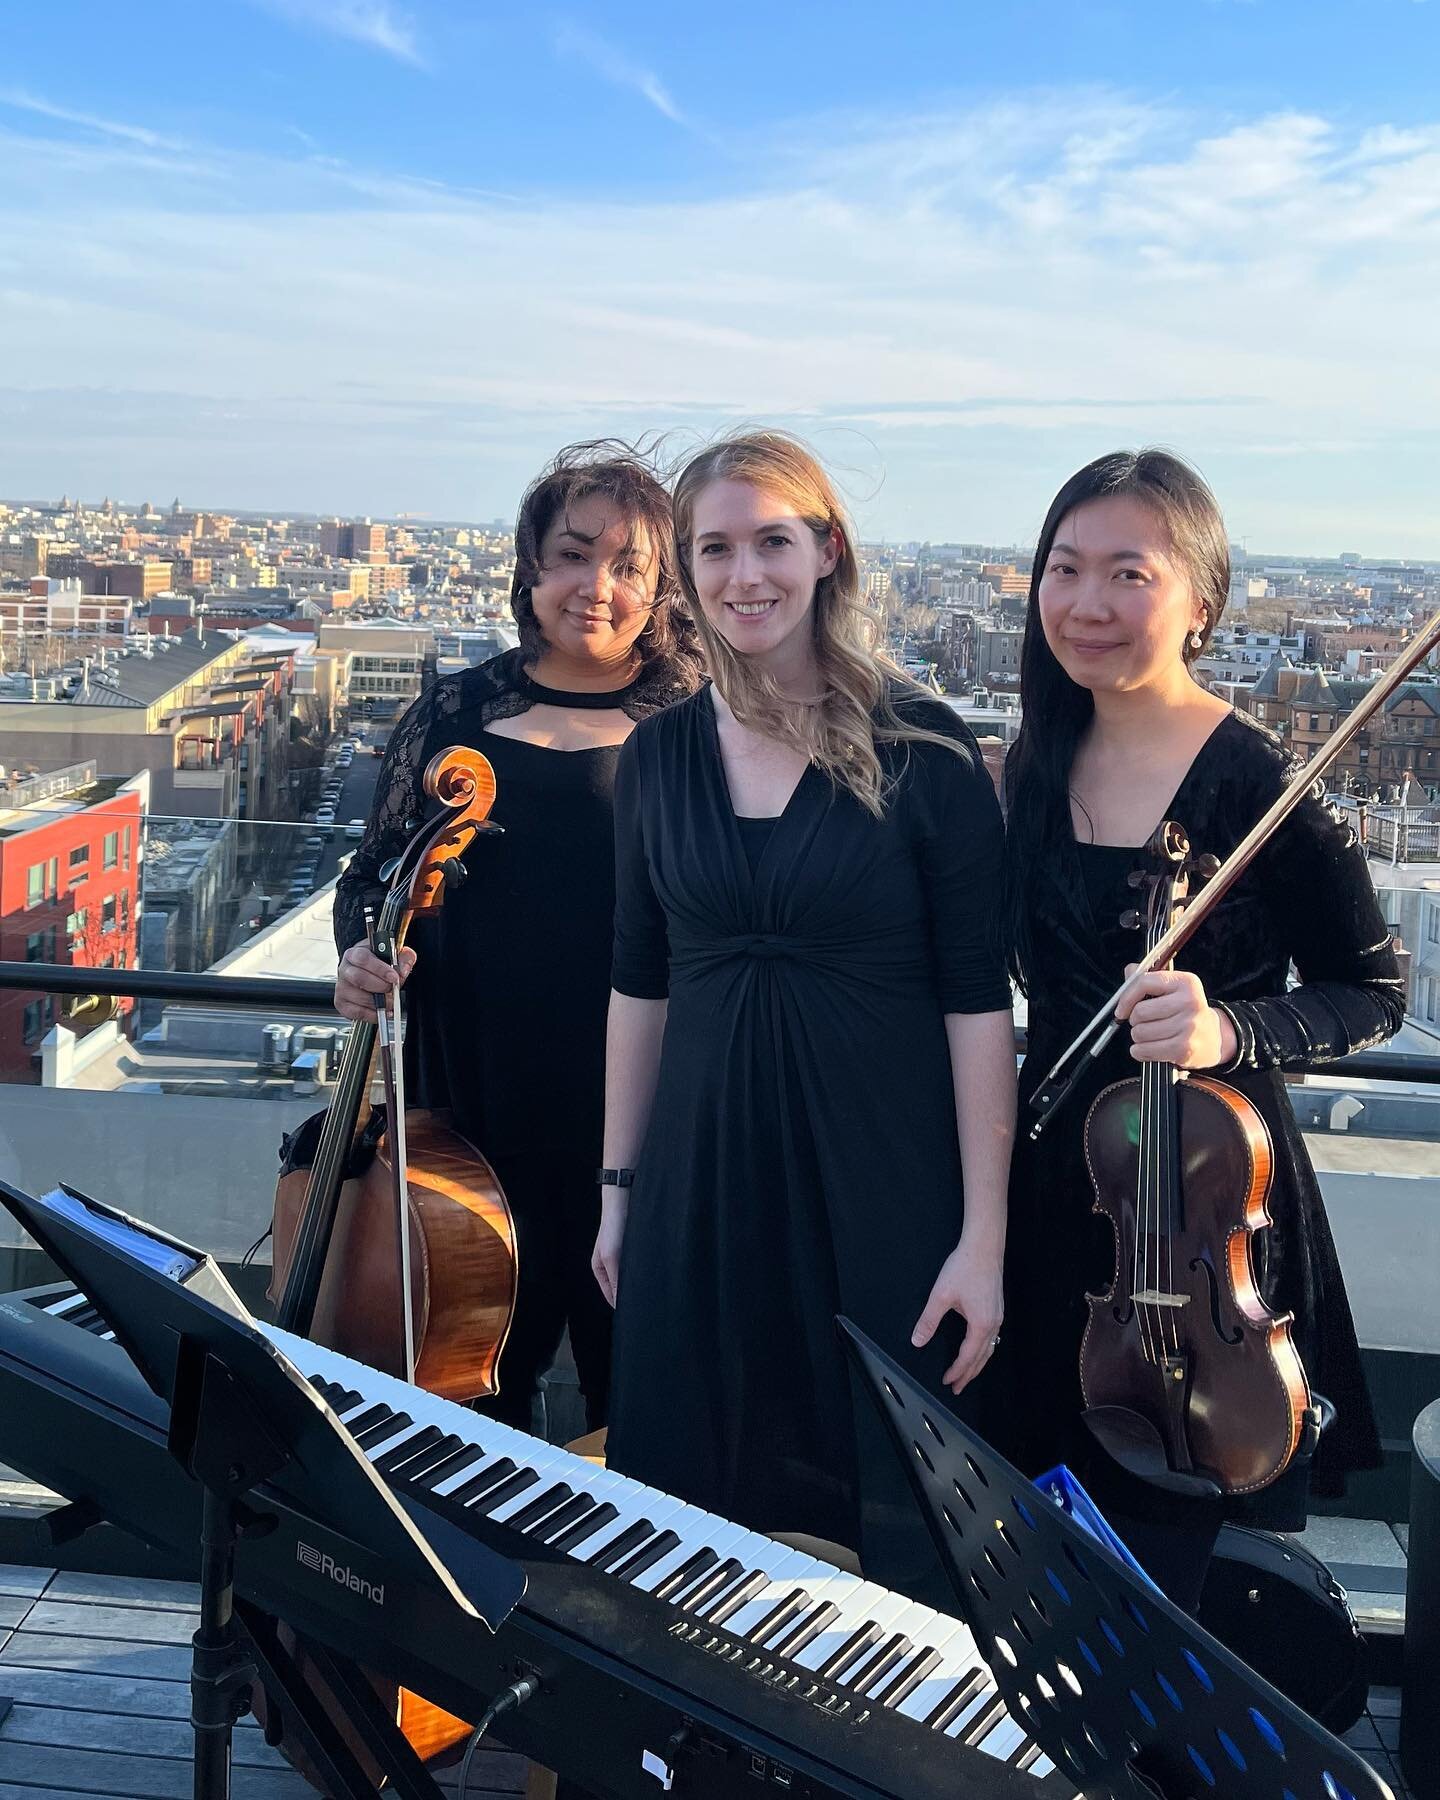 A stunning rooftop #wedding ceremony at @thelinehotel 

Unrelated words of wisdom: in a wind vs. hair duel, the wind always wins! 😅

#weddingmusicians #amaristrio #pianotrio #violincellopiano #dcweddingmusicians #dcmusicians